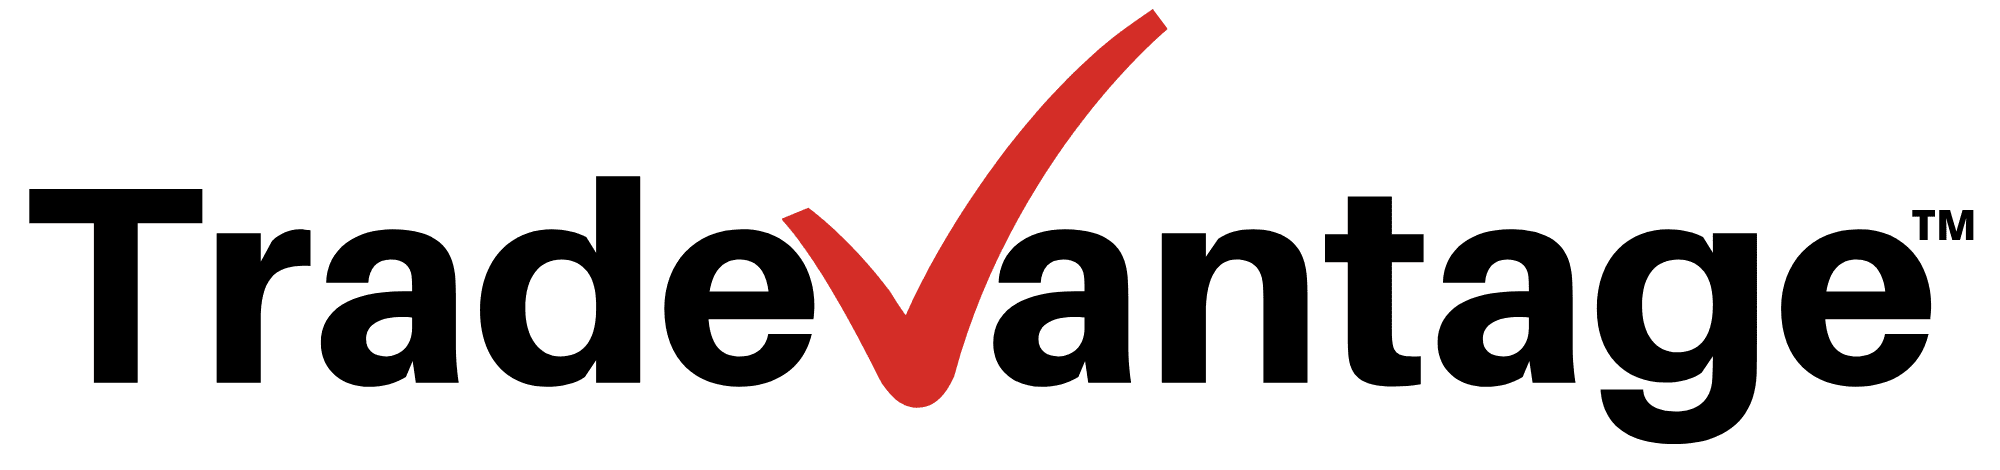 TradeVantage Coupons and Promo Code